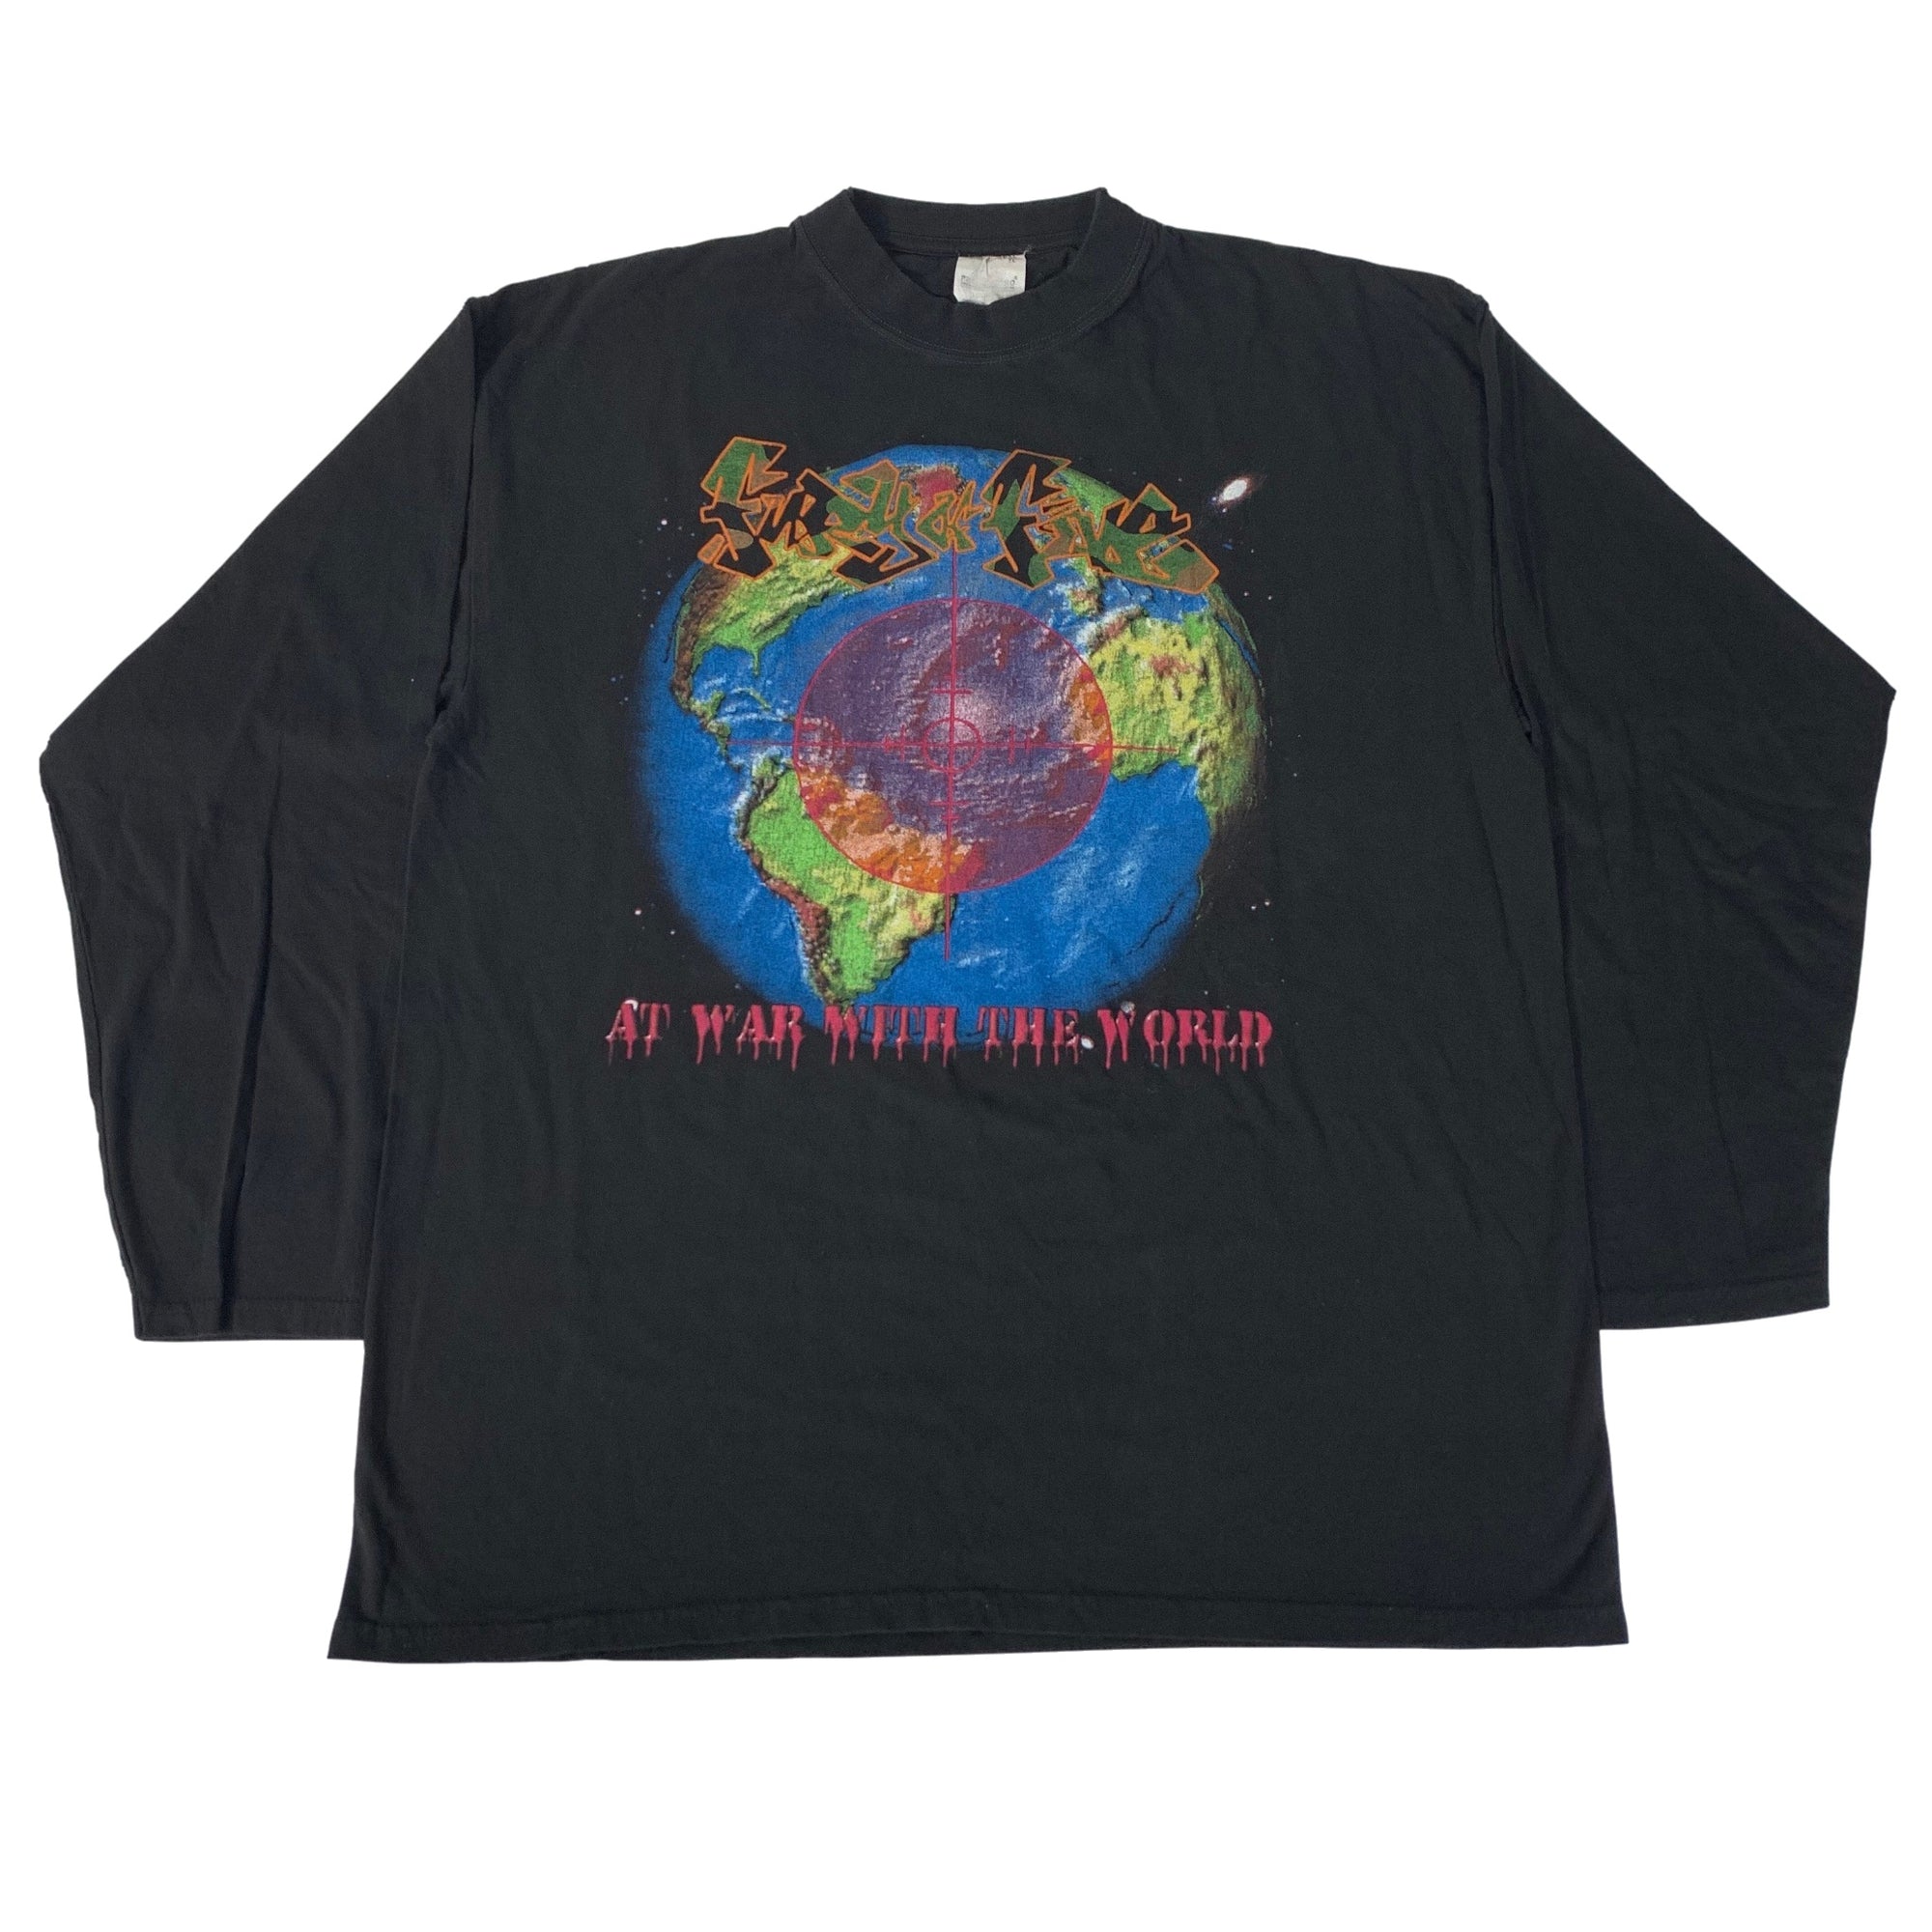 Vintage Fury of Five "At War With The World" T-Shirt - jointcustodydc